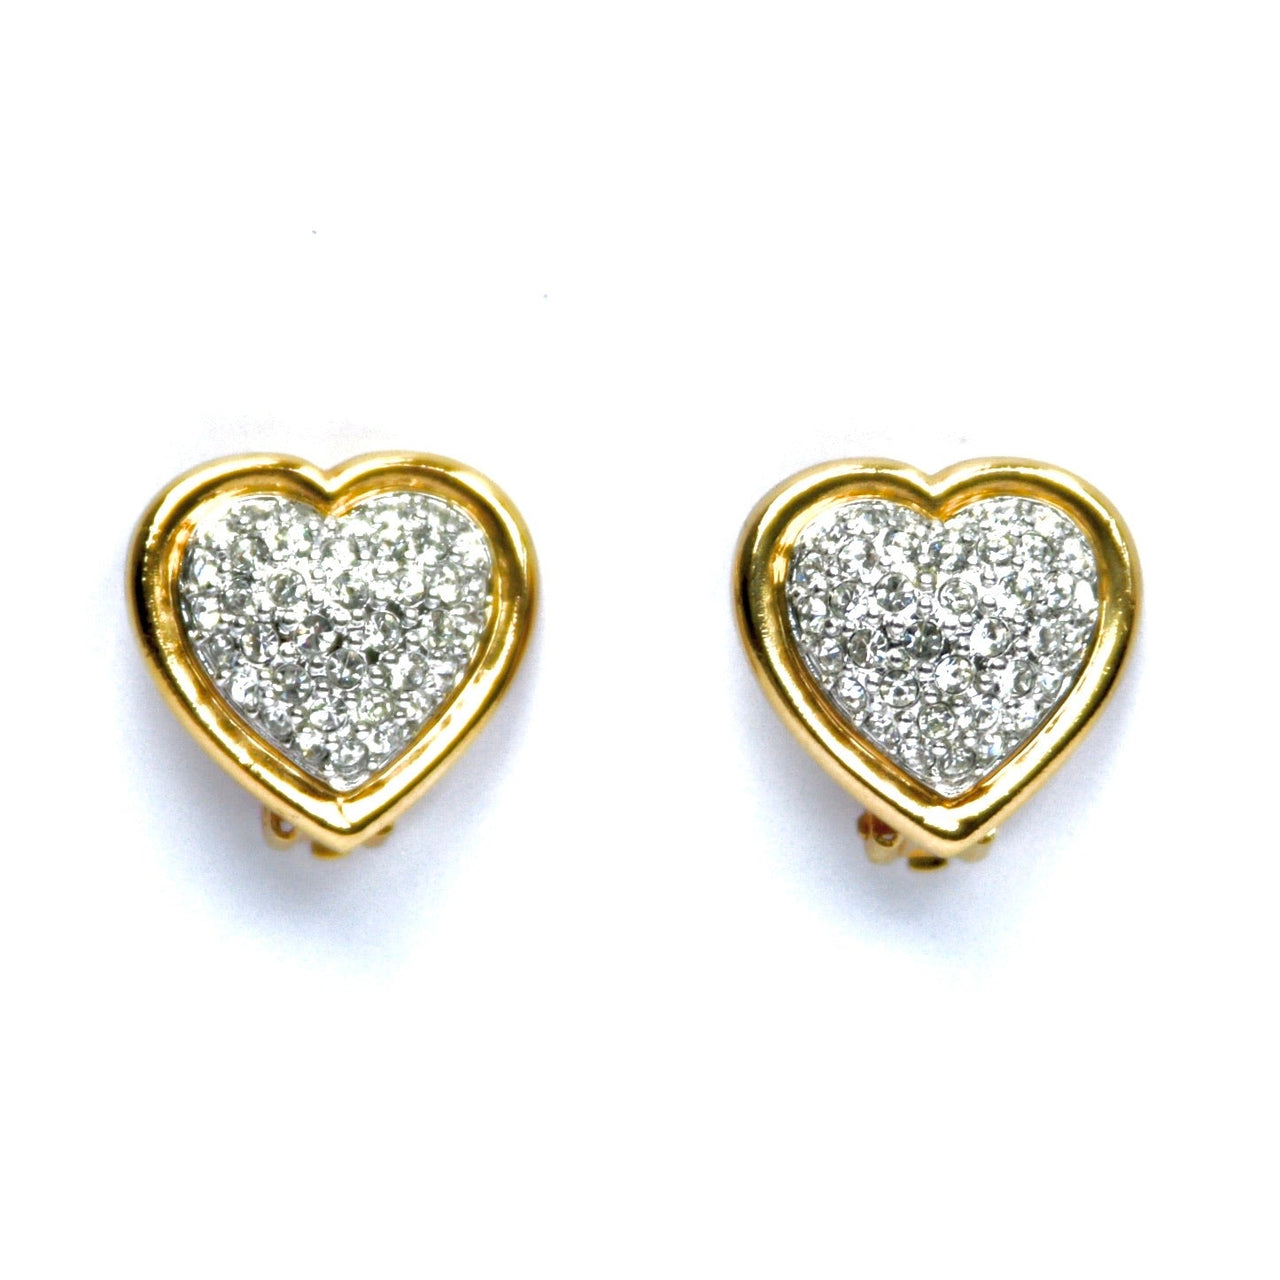 Gold plated 1980s Vintage Swarovski Crystal Heart Clip On Earrings